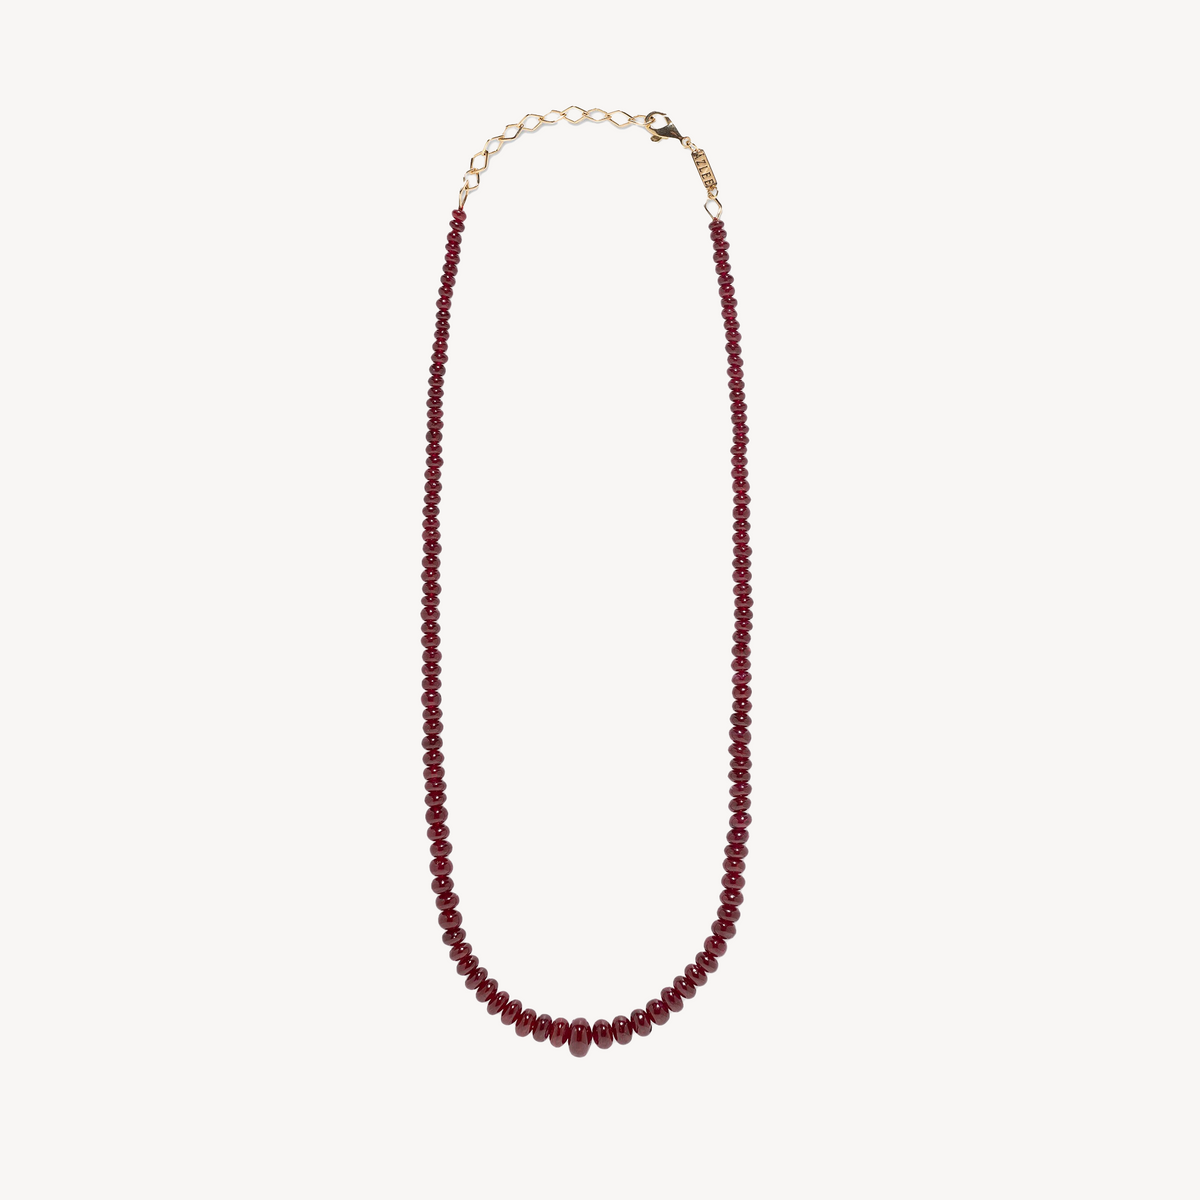 Rich Ruby Bead Necklace